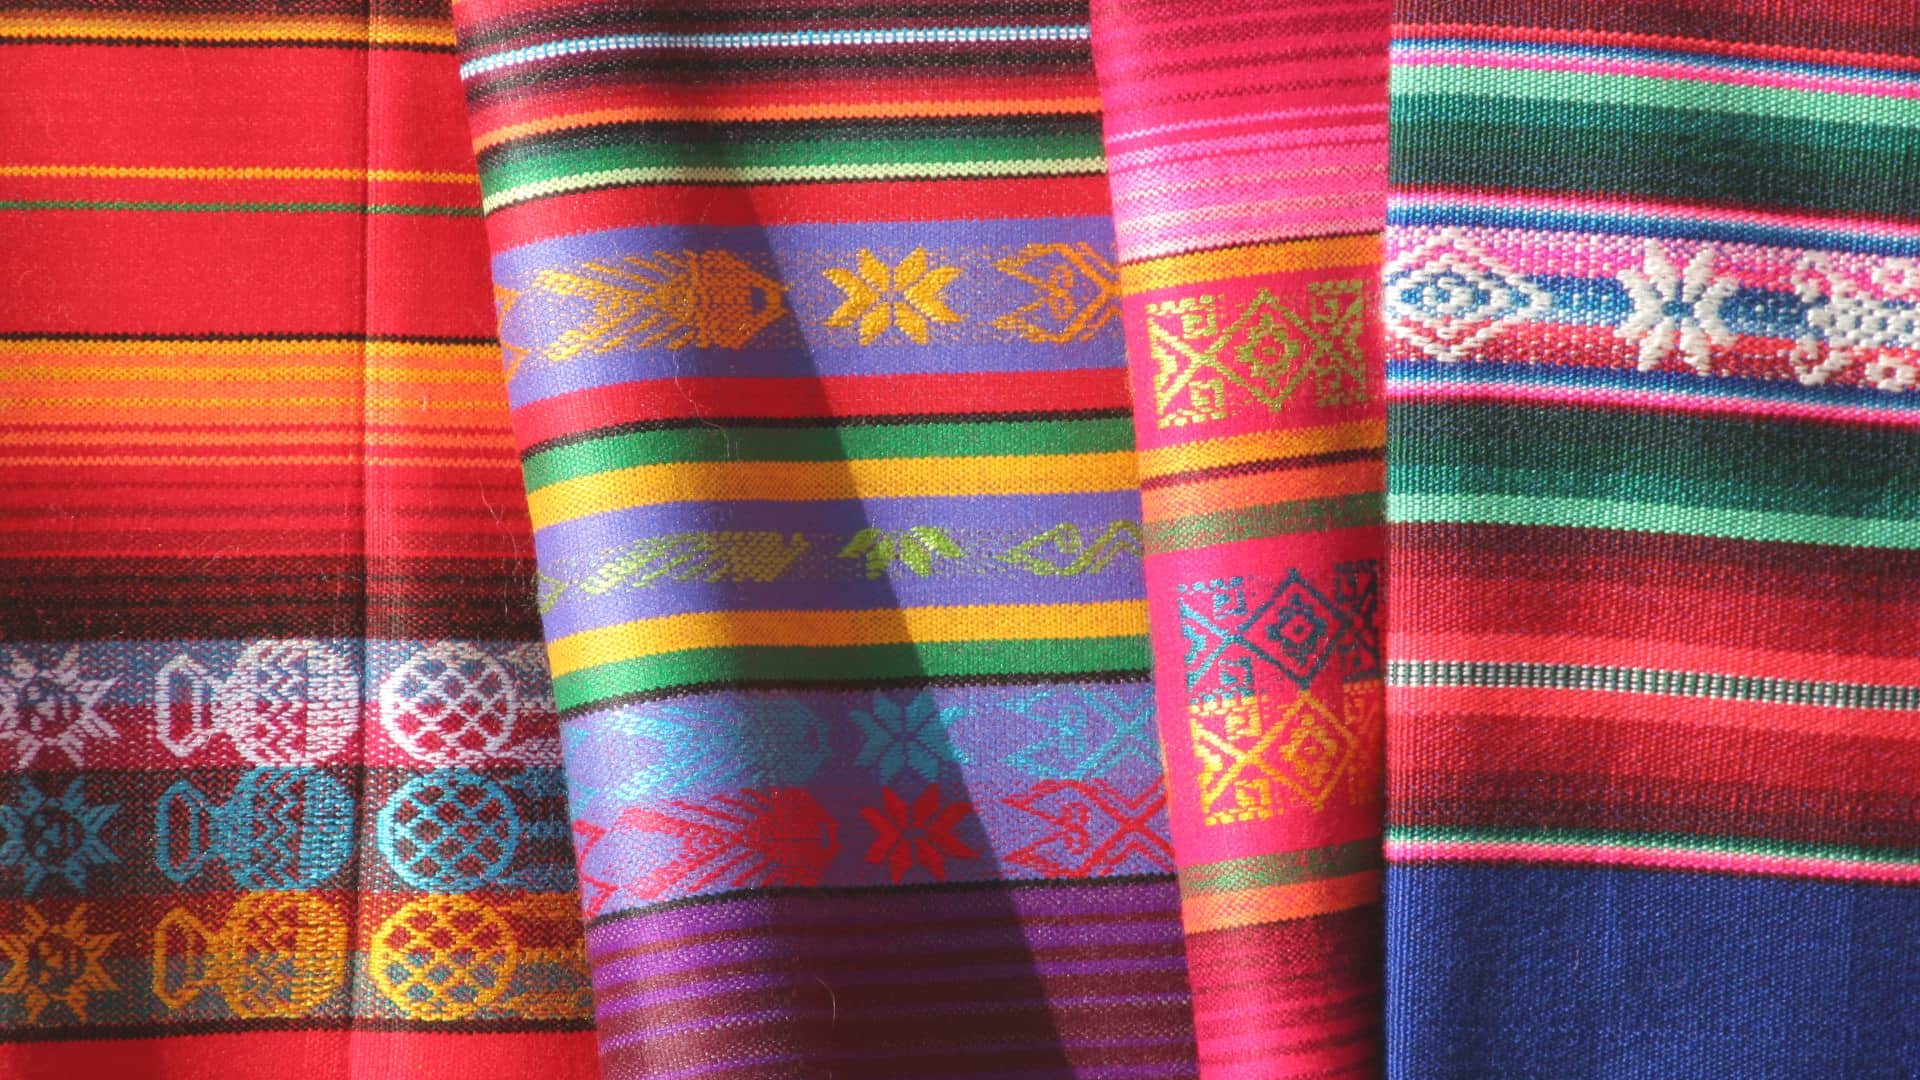 Close up view of woven Native American blankets with red, orange, green, and blue designs